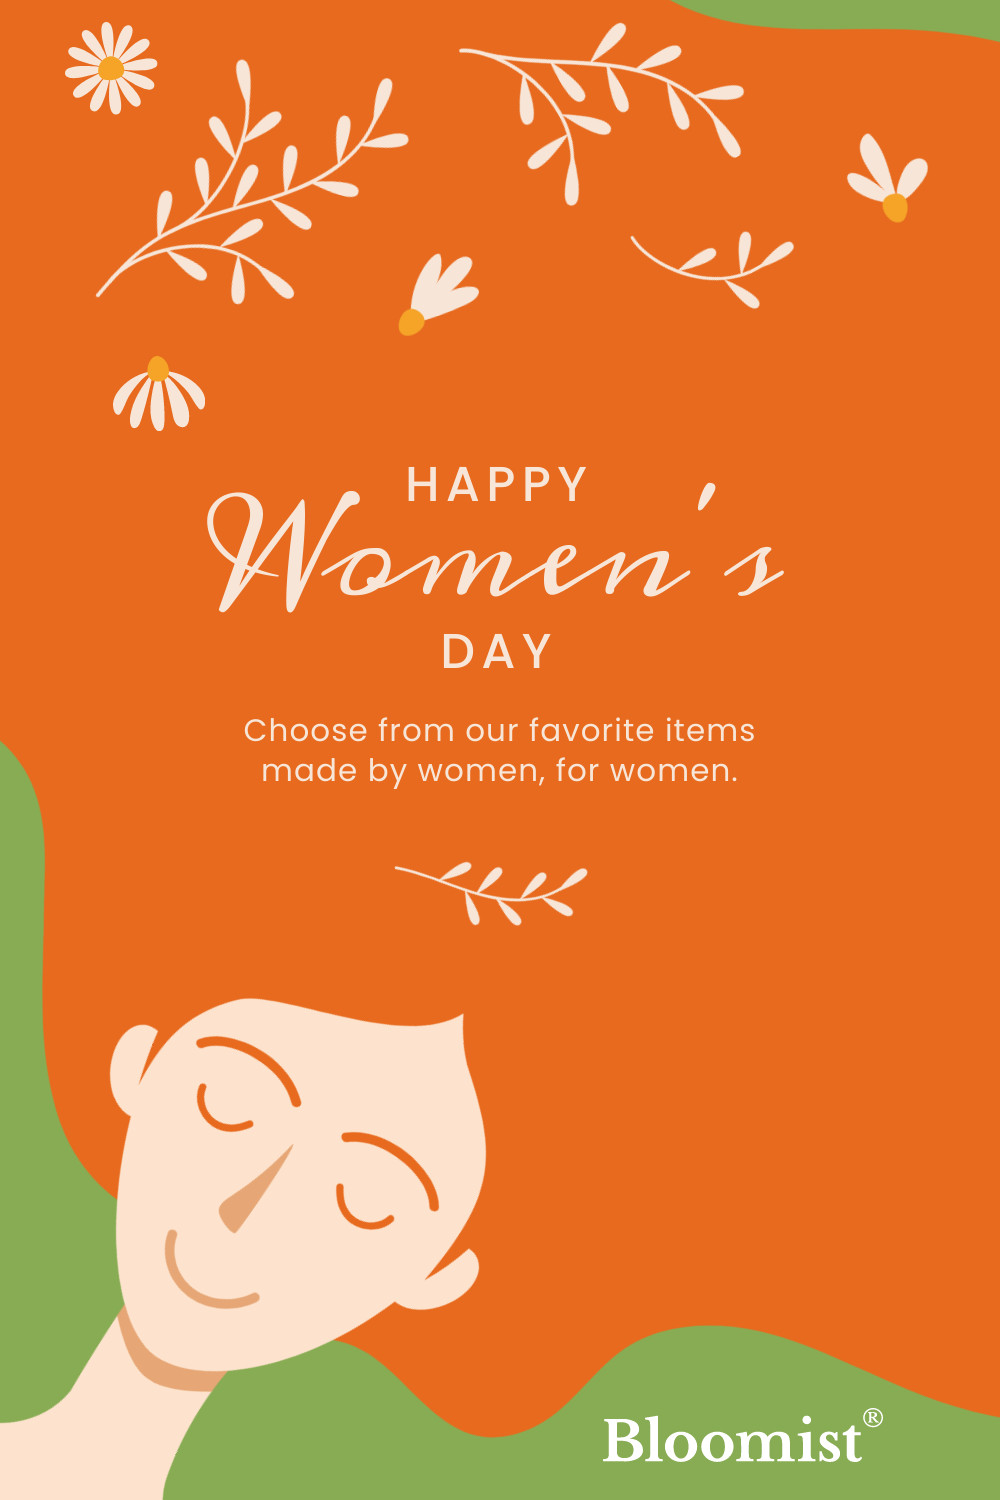 Happy Women's Day Hair Illustration Facebook Cover 820x360